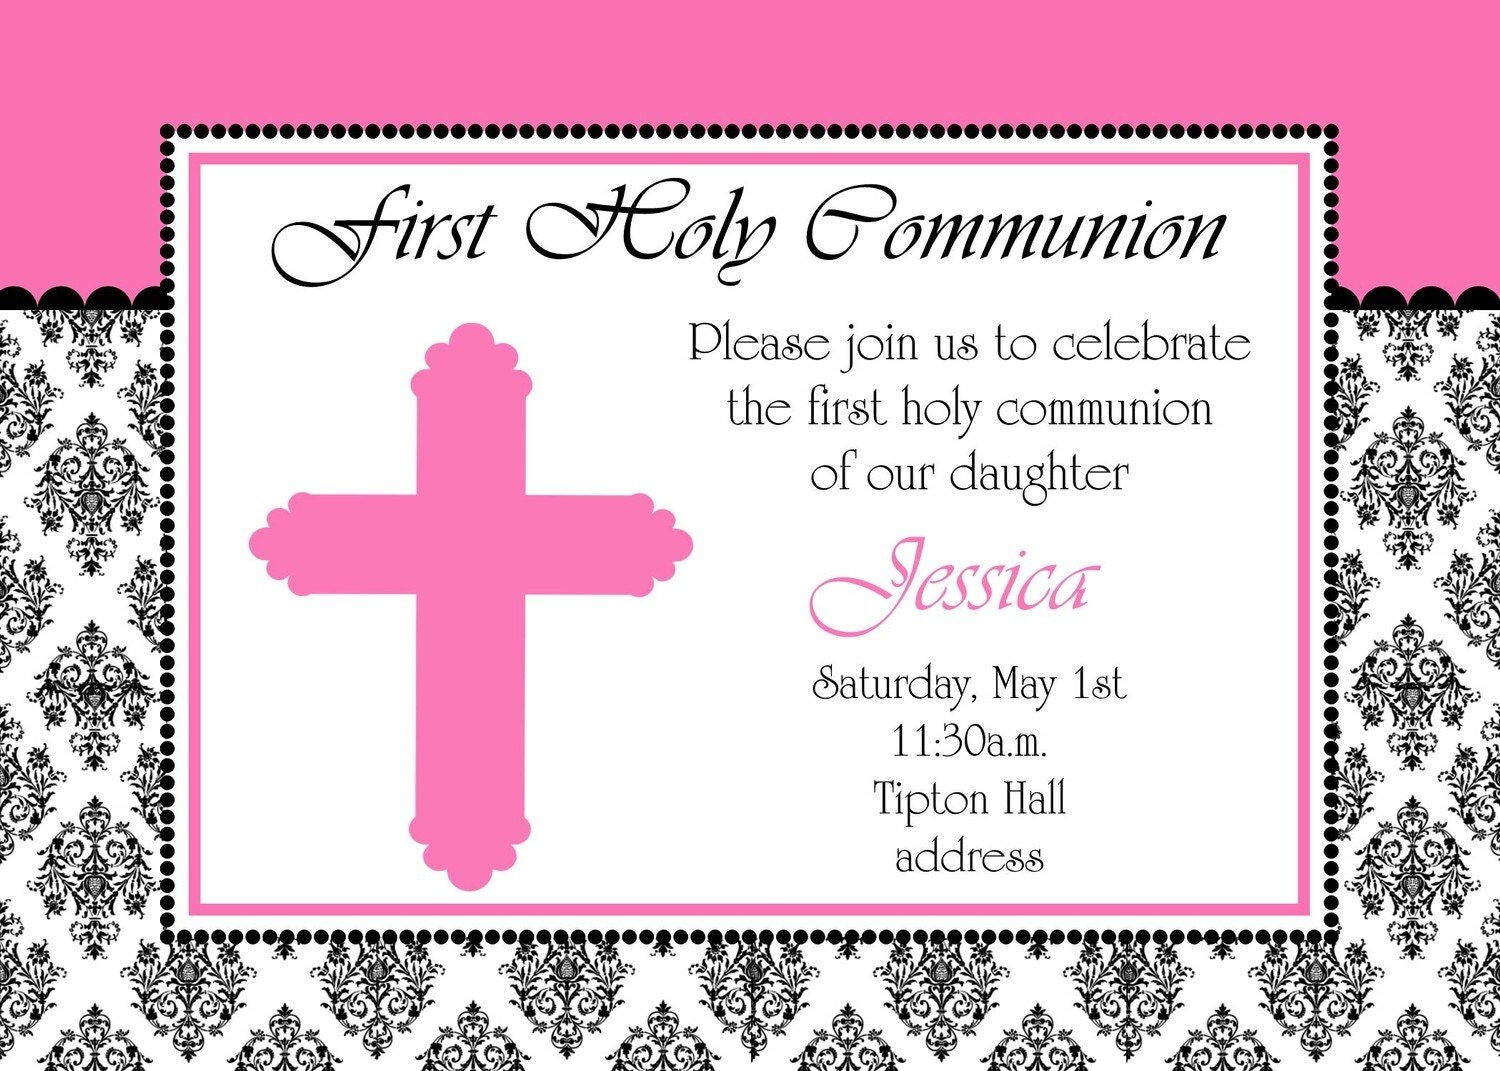 girly-first-holy-communion-invitation-by-mmcarddesigns-on-etsy